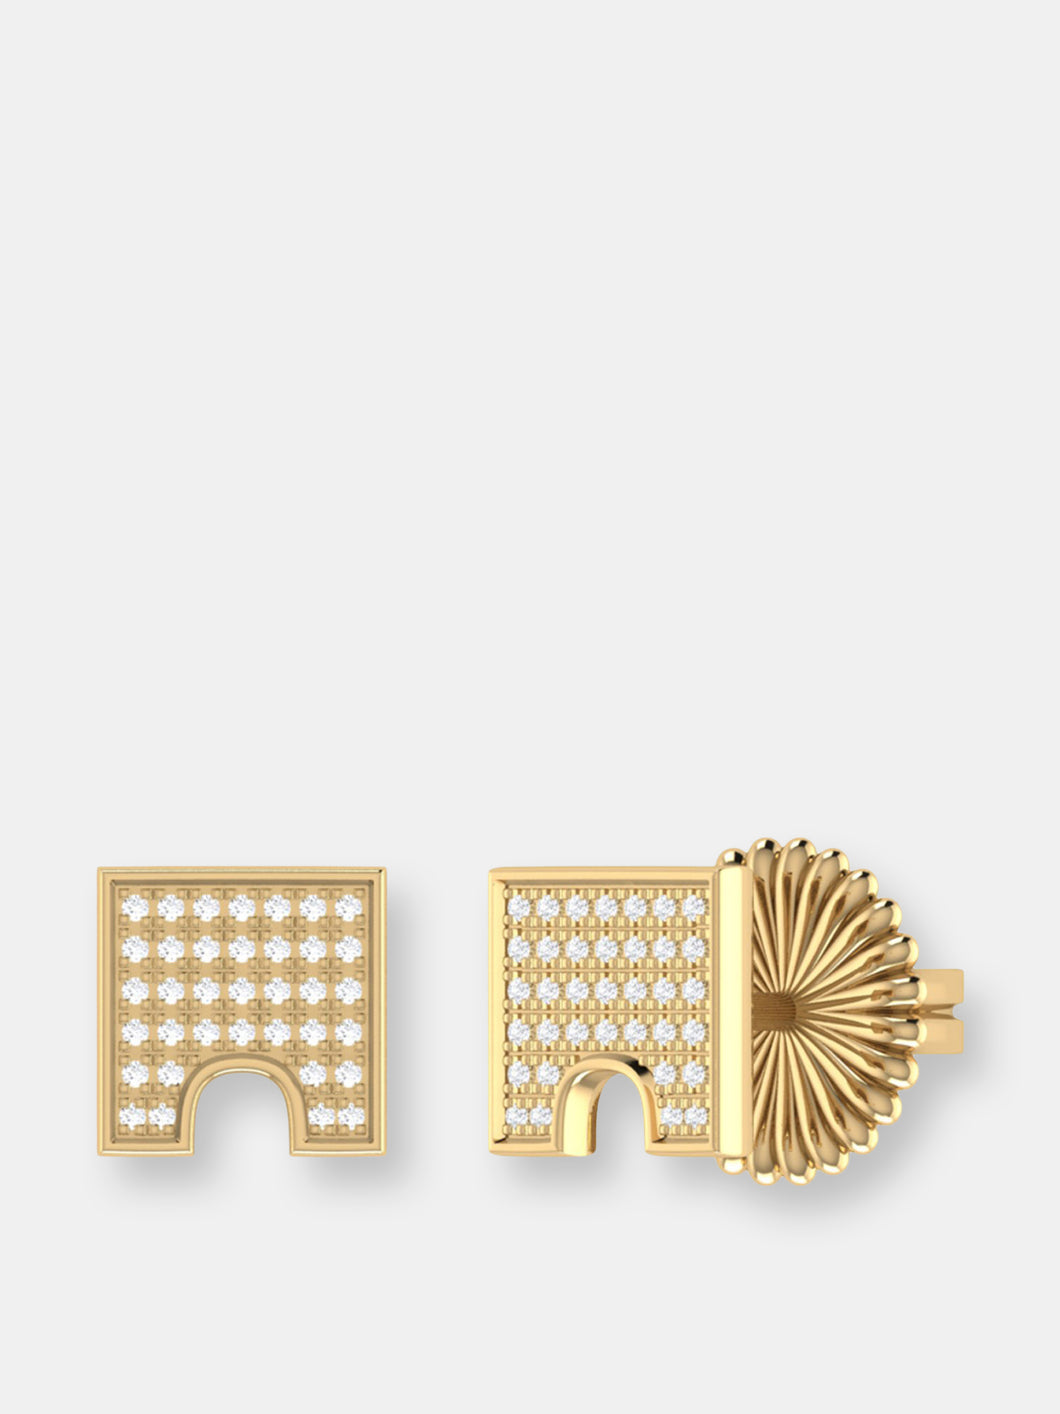 City Arches Square Diamond Stud Earrings in 14K Yellow Gold Vermeil on Sterling Silver